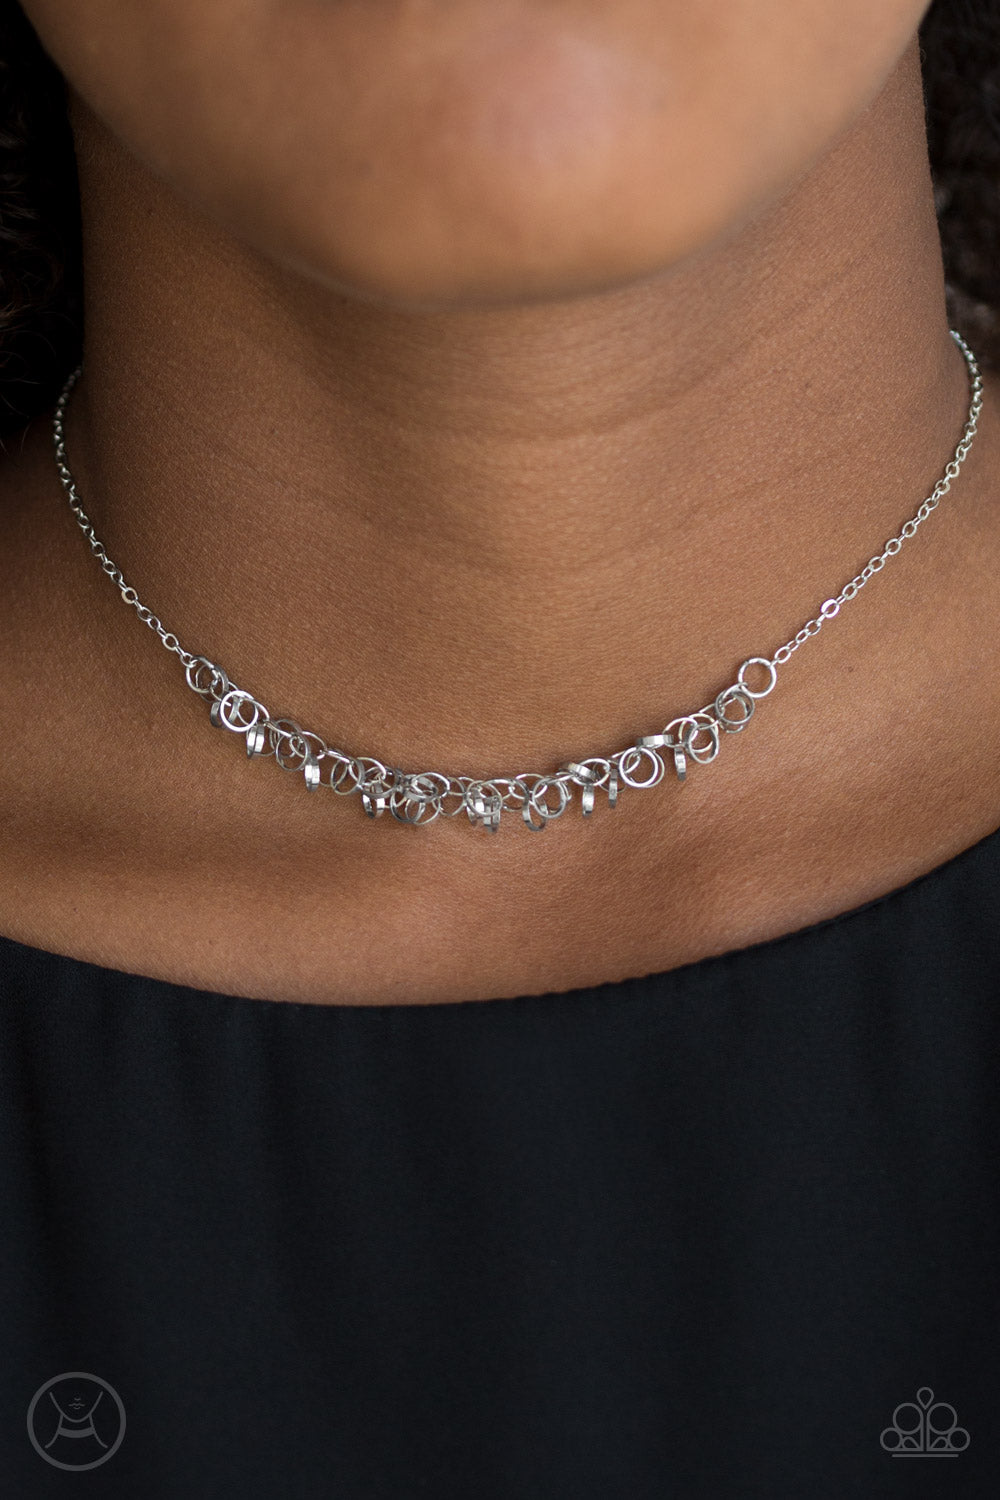 Cat Got Your Tongue? Silver Choker Necklace